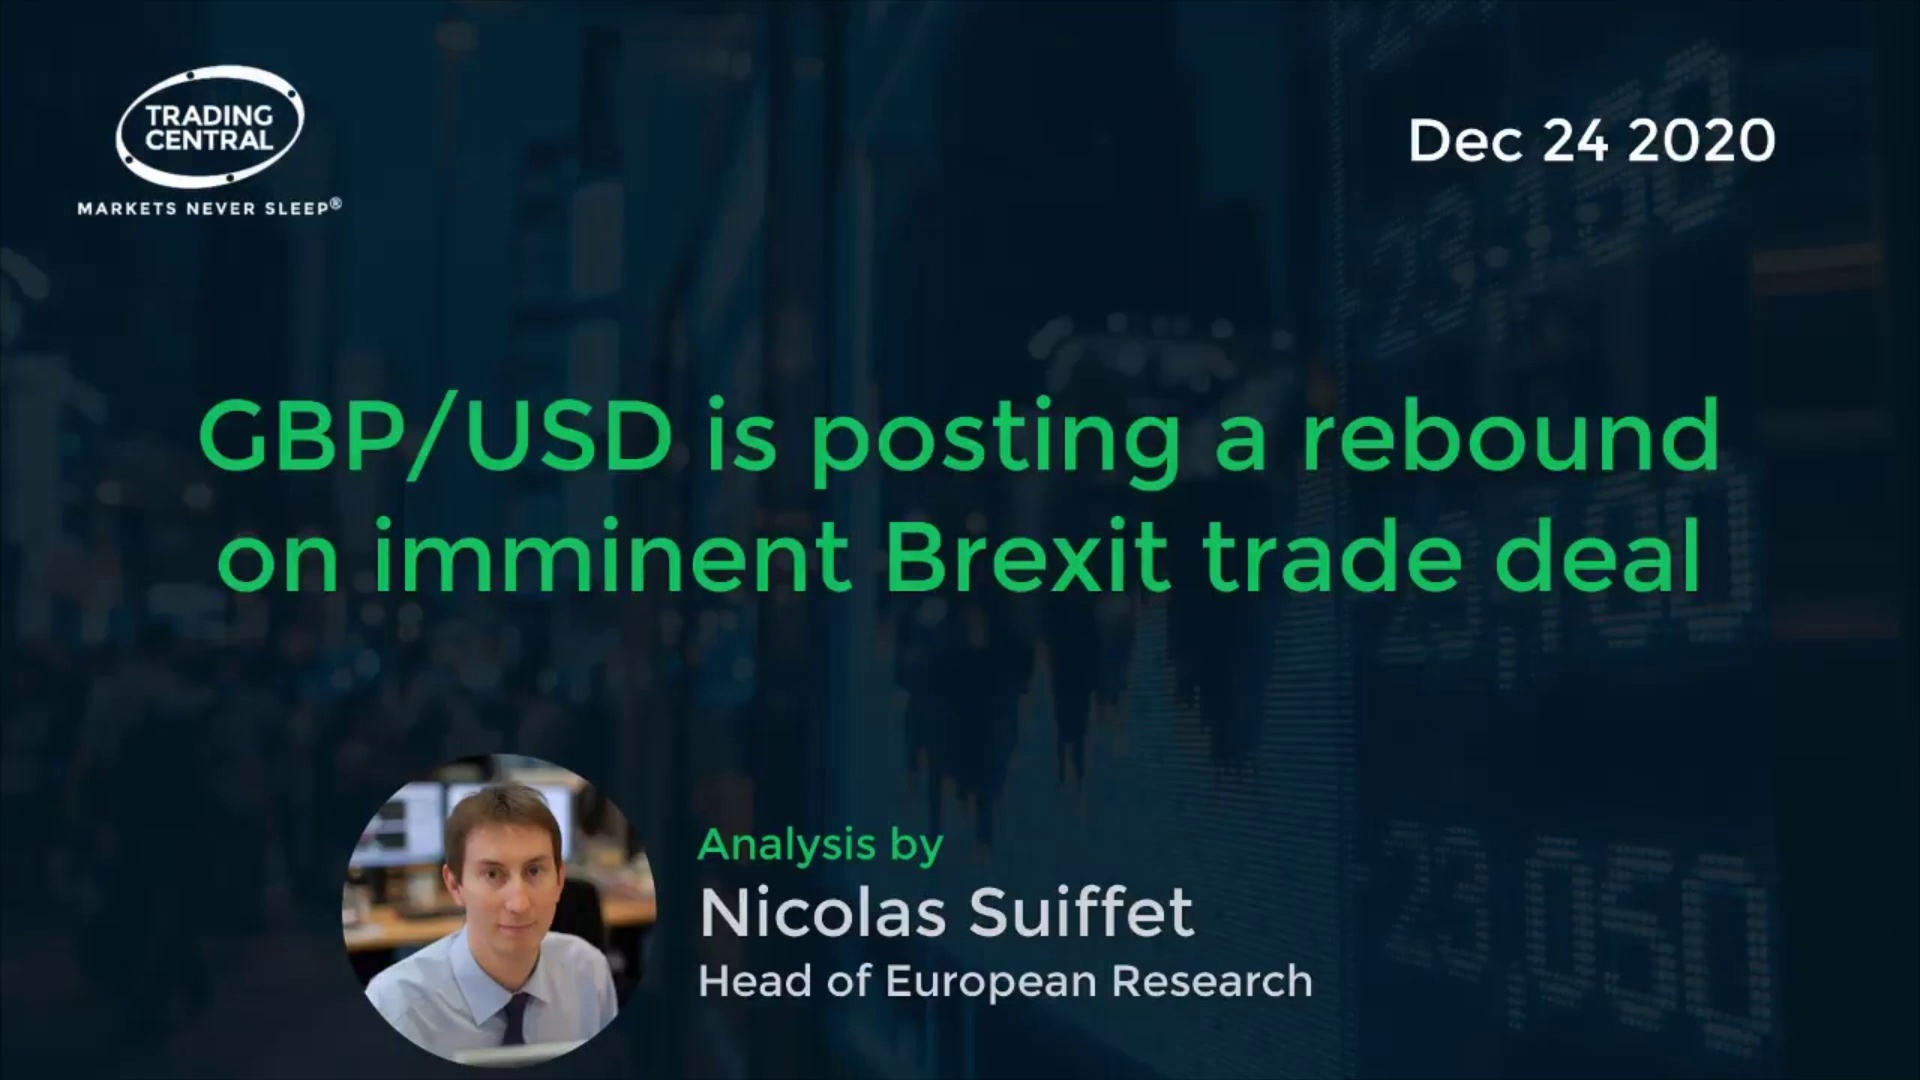 (RECAP) DAILY NOTION - FOLLOWME x TradingCentral - GBP/USD Is Posting a Rebound on Imminent Brexit Trade Deal. - Dec 24, 2020[[2,#GBP/USD#,GBP/USD]][[1,#Brexit#,10001014]][[1,#technicalanalysis#,10004309]][[1,#TradingCentral#,50001098]]